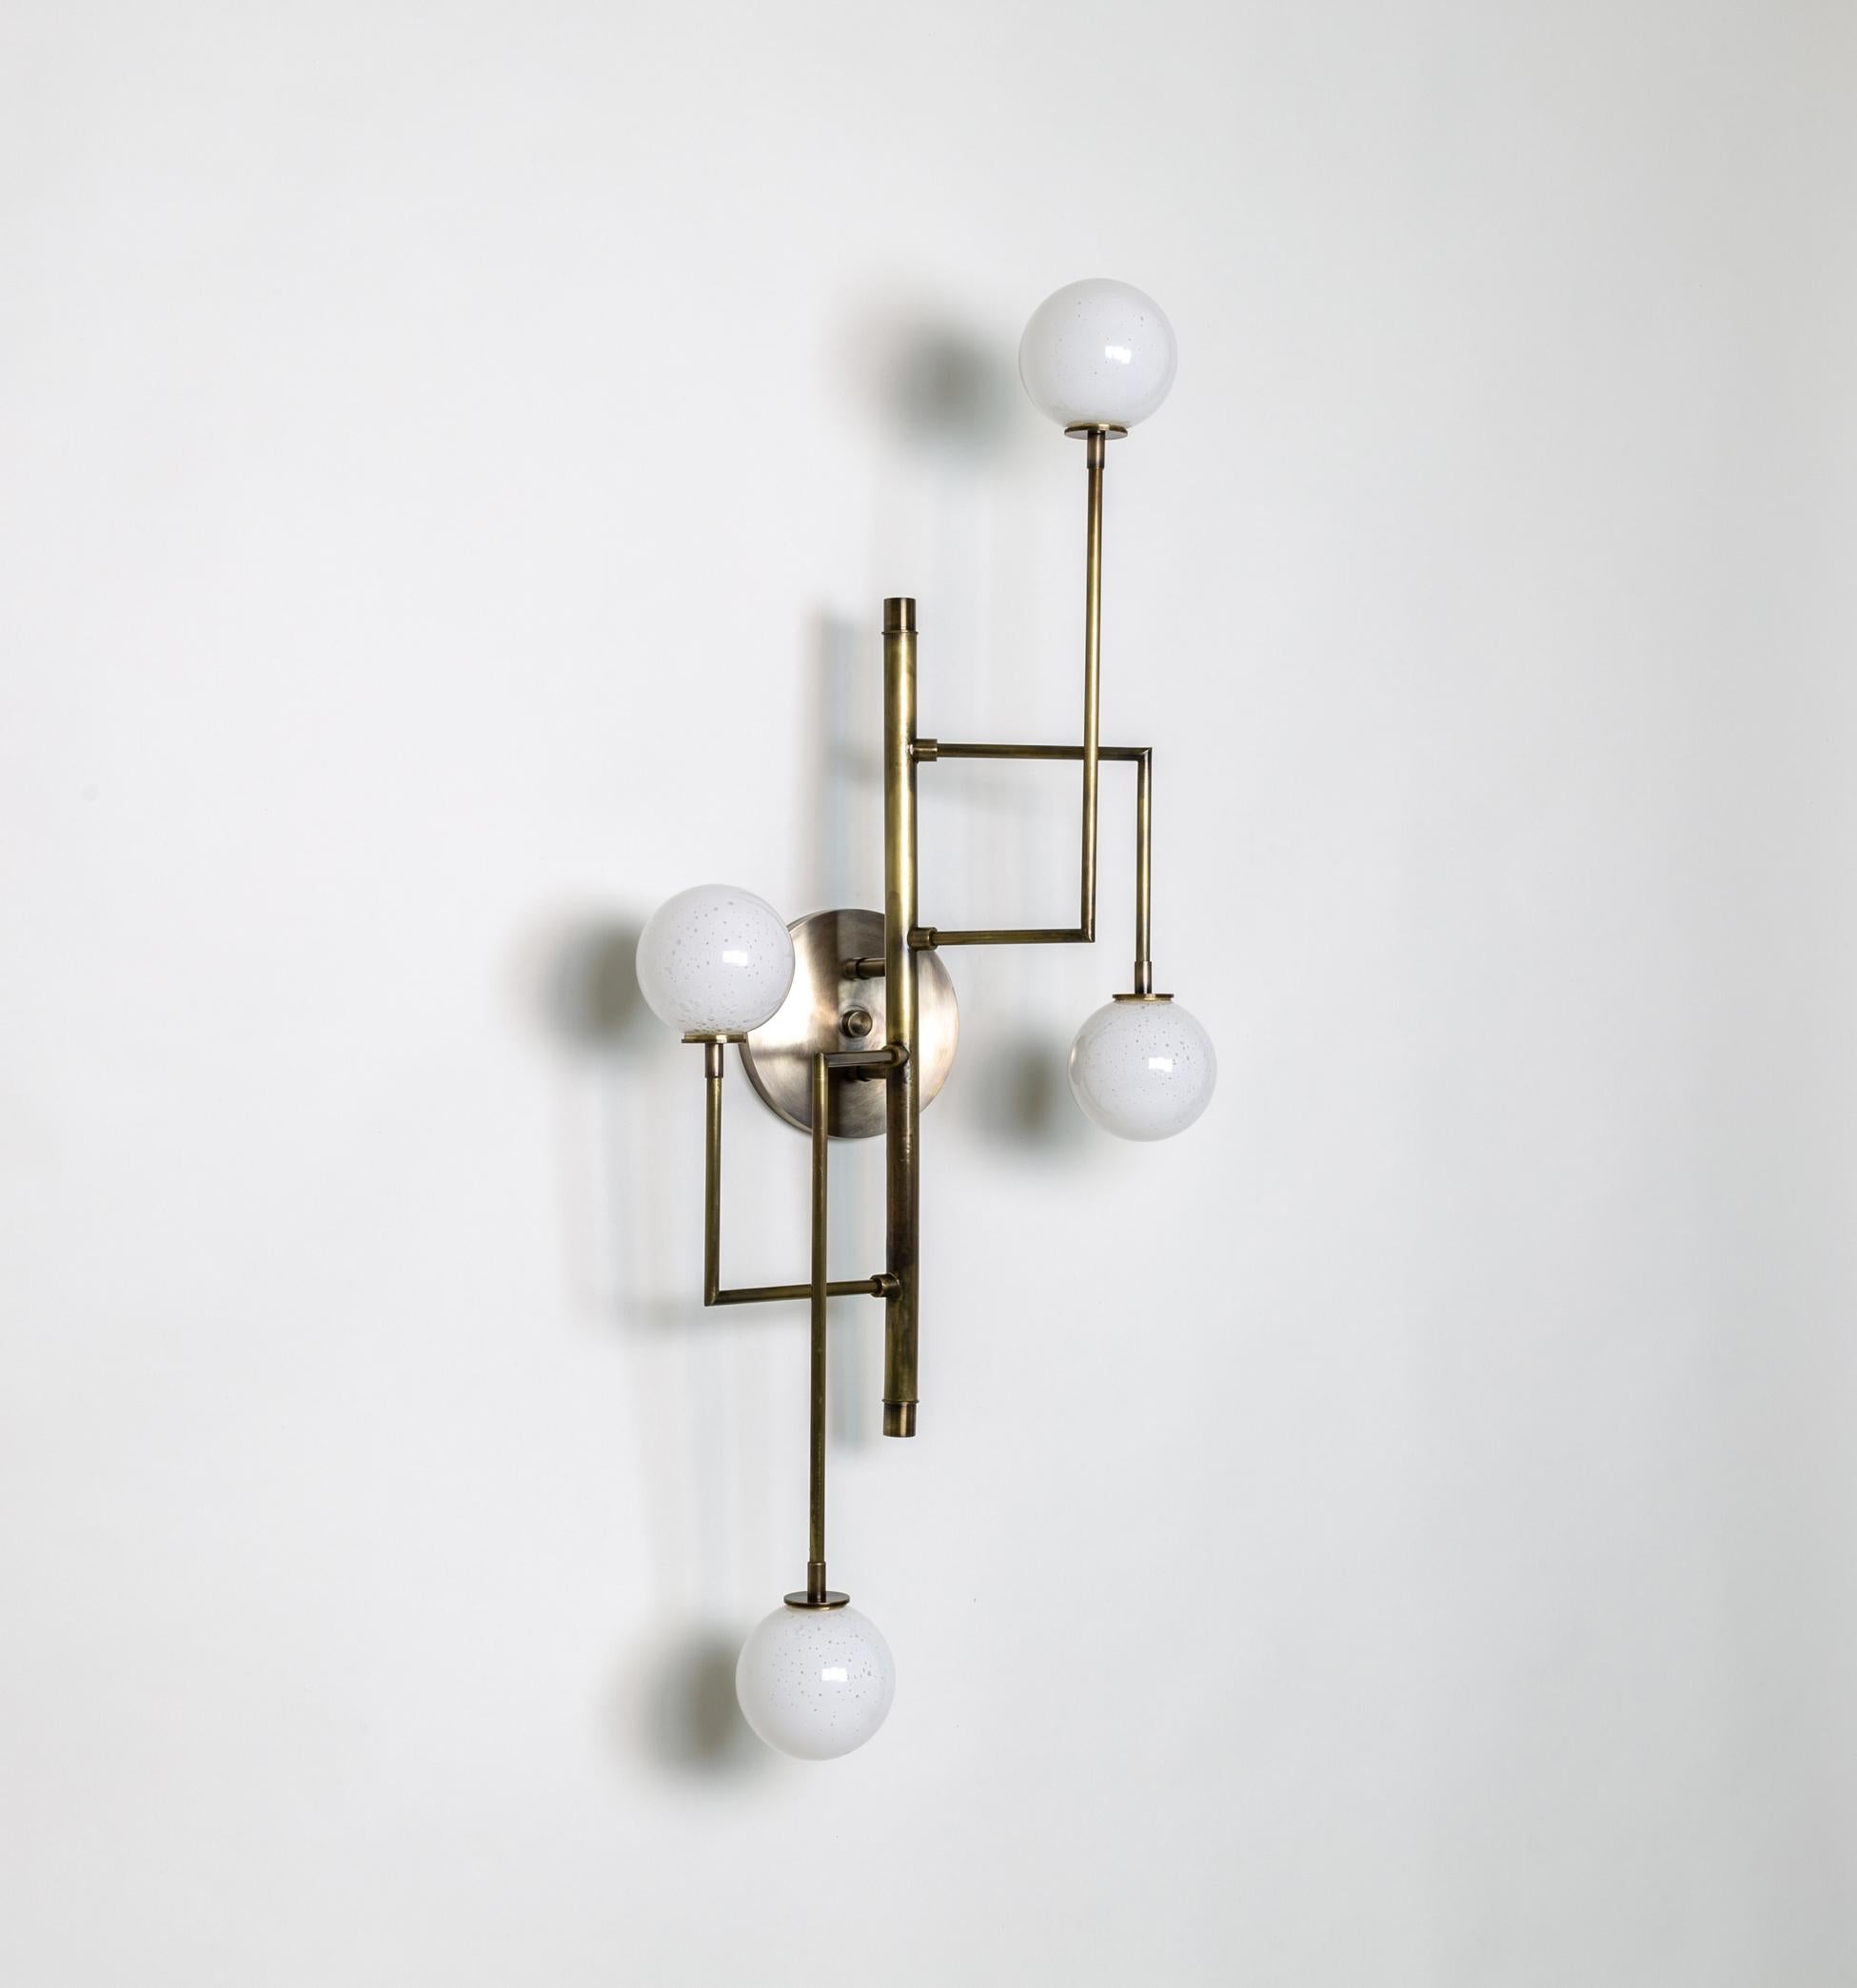 Halo Sconce 4, Brass, Hand Blown Glass Contemporary Wall Sconce, Kalin Asenov In New Condition For Sale In Savannah, GA